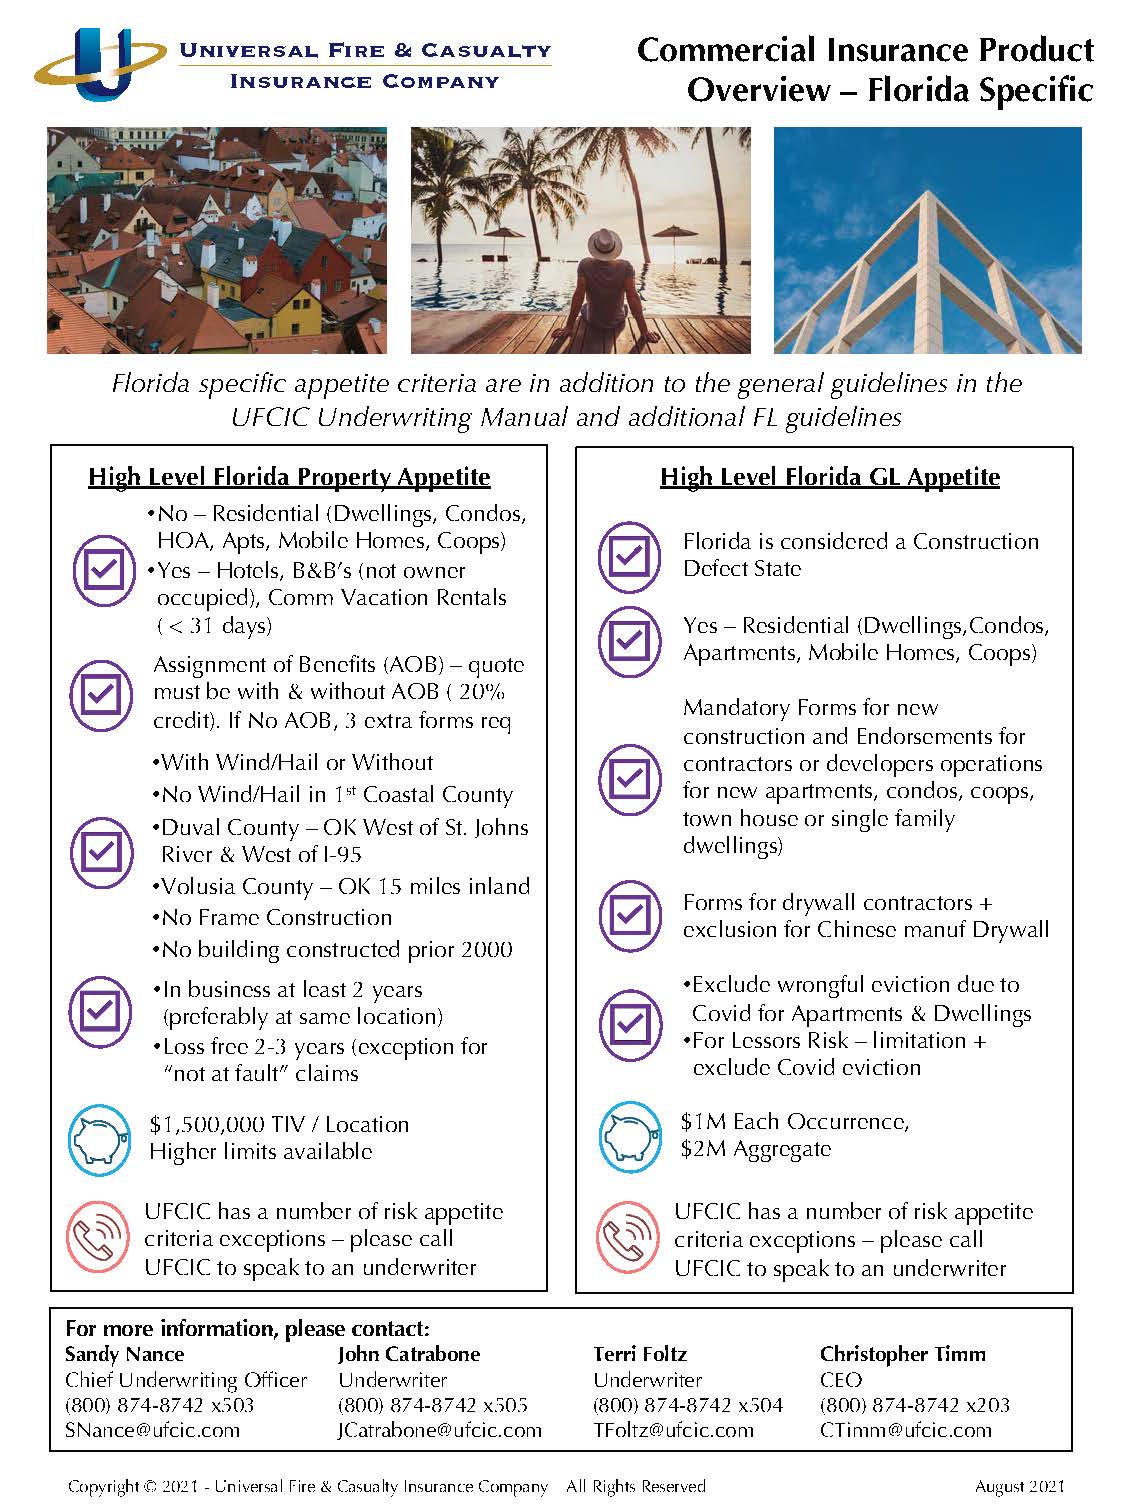 UFCIC Commercial Insurance Product Overview Flyer